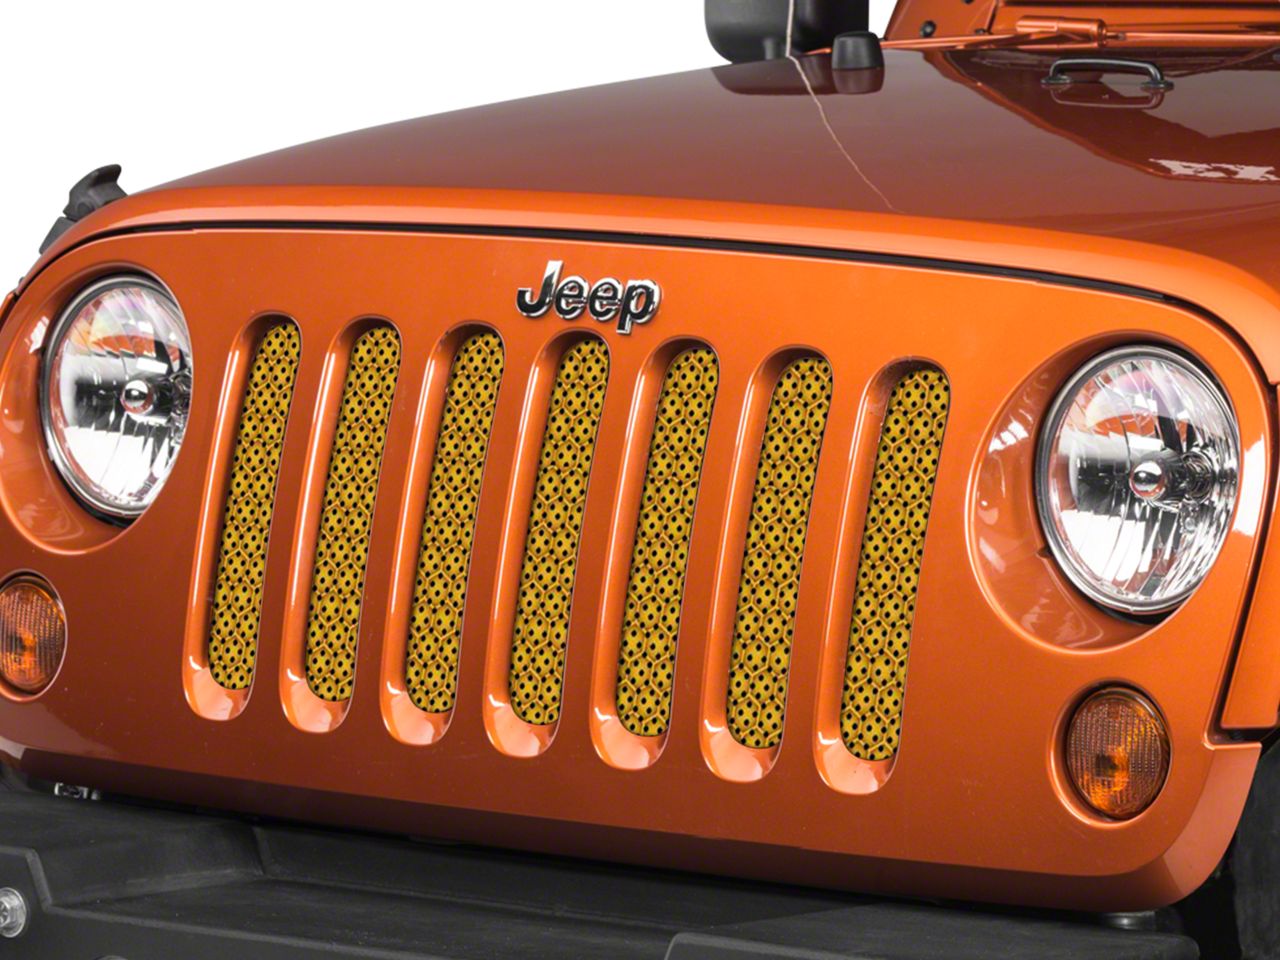 Allinoneparts Jeep Wrangler Grill Inserts TJ Grille Inserts Matte Black Honeycomb Hole Mesh ABS Jeep Wrangler Accessories TJ &Unlimited Rubicon Sahara Sports1997-2006-7 Pcs 